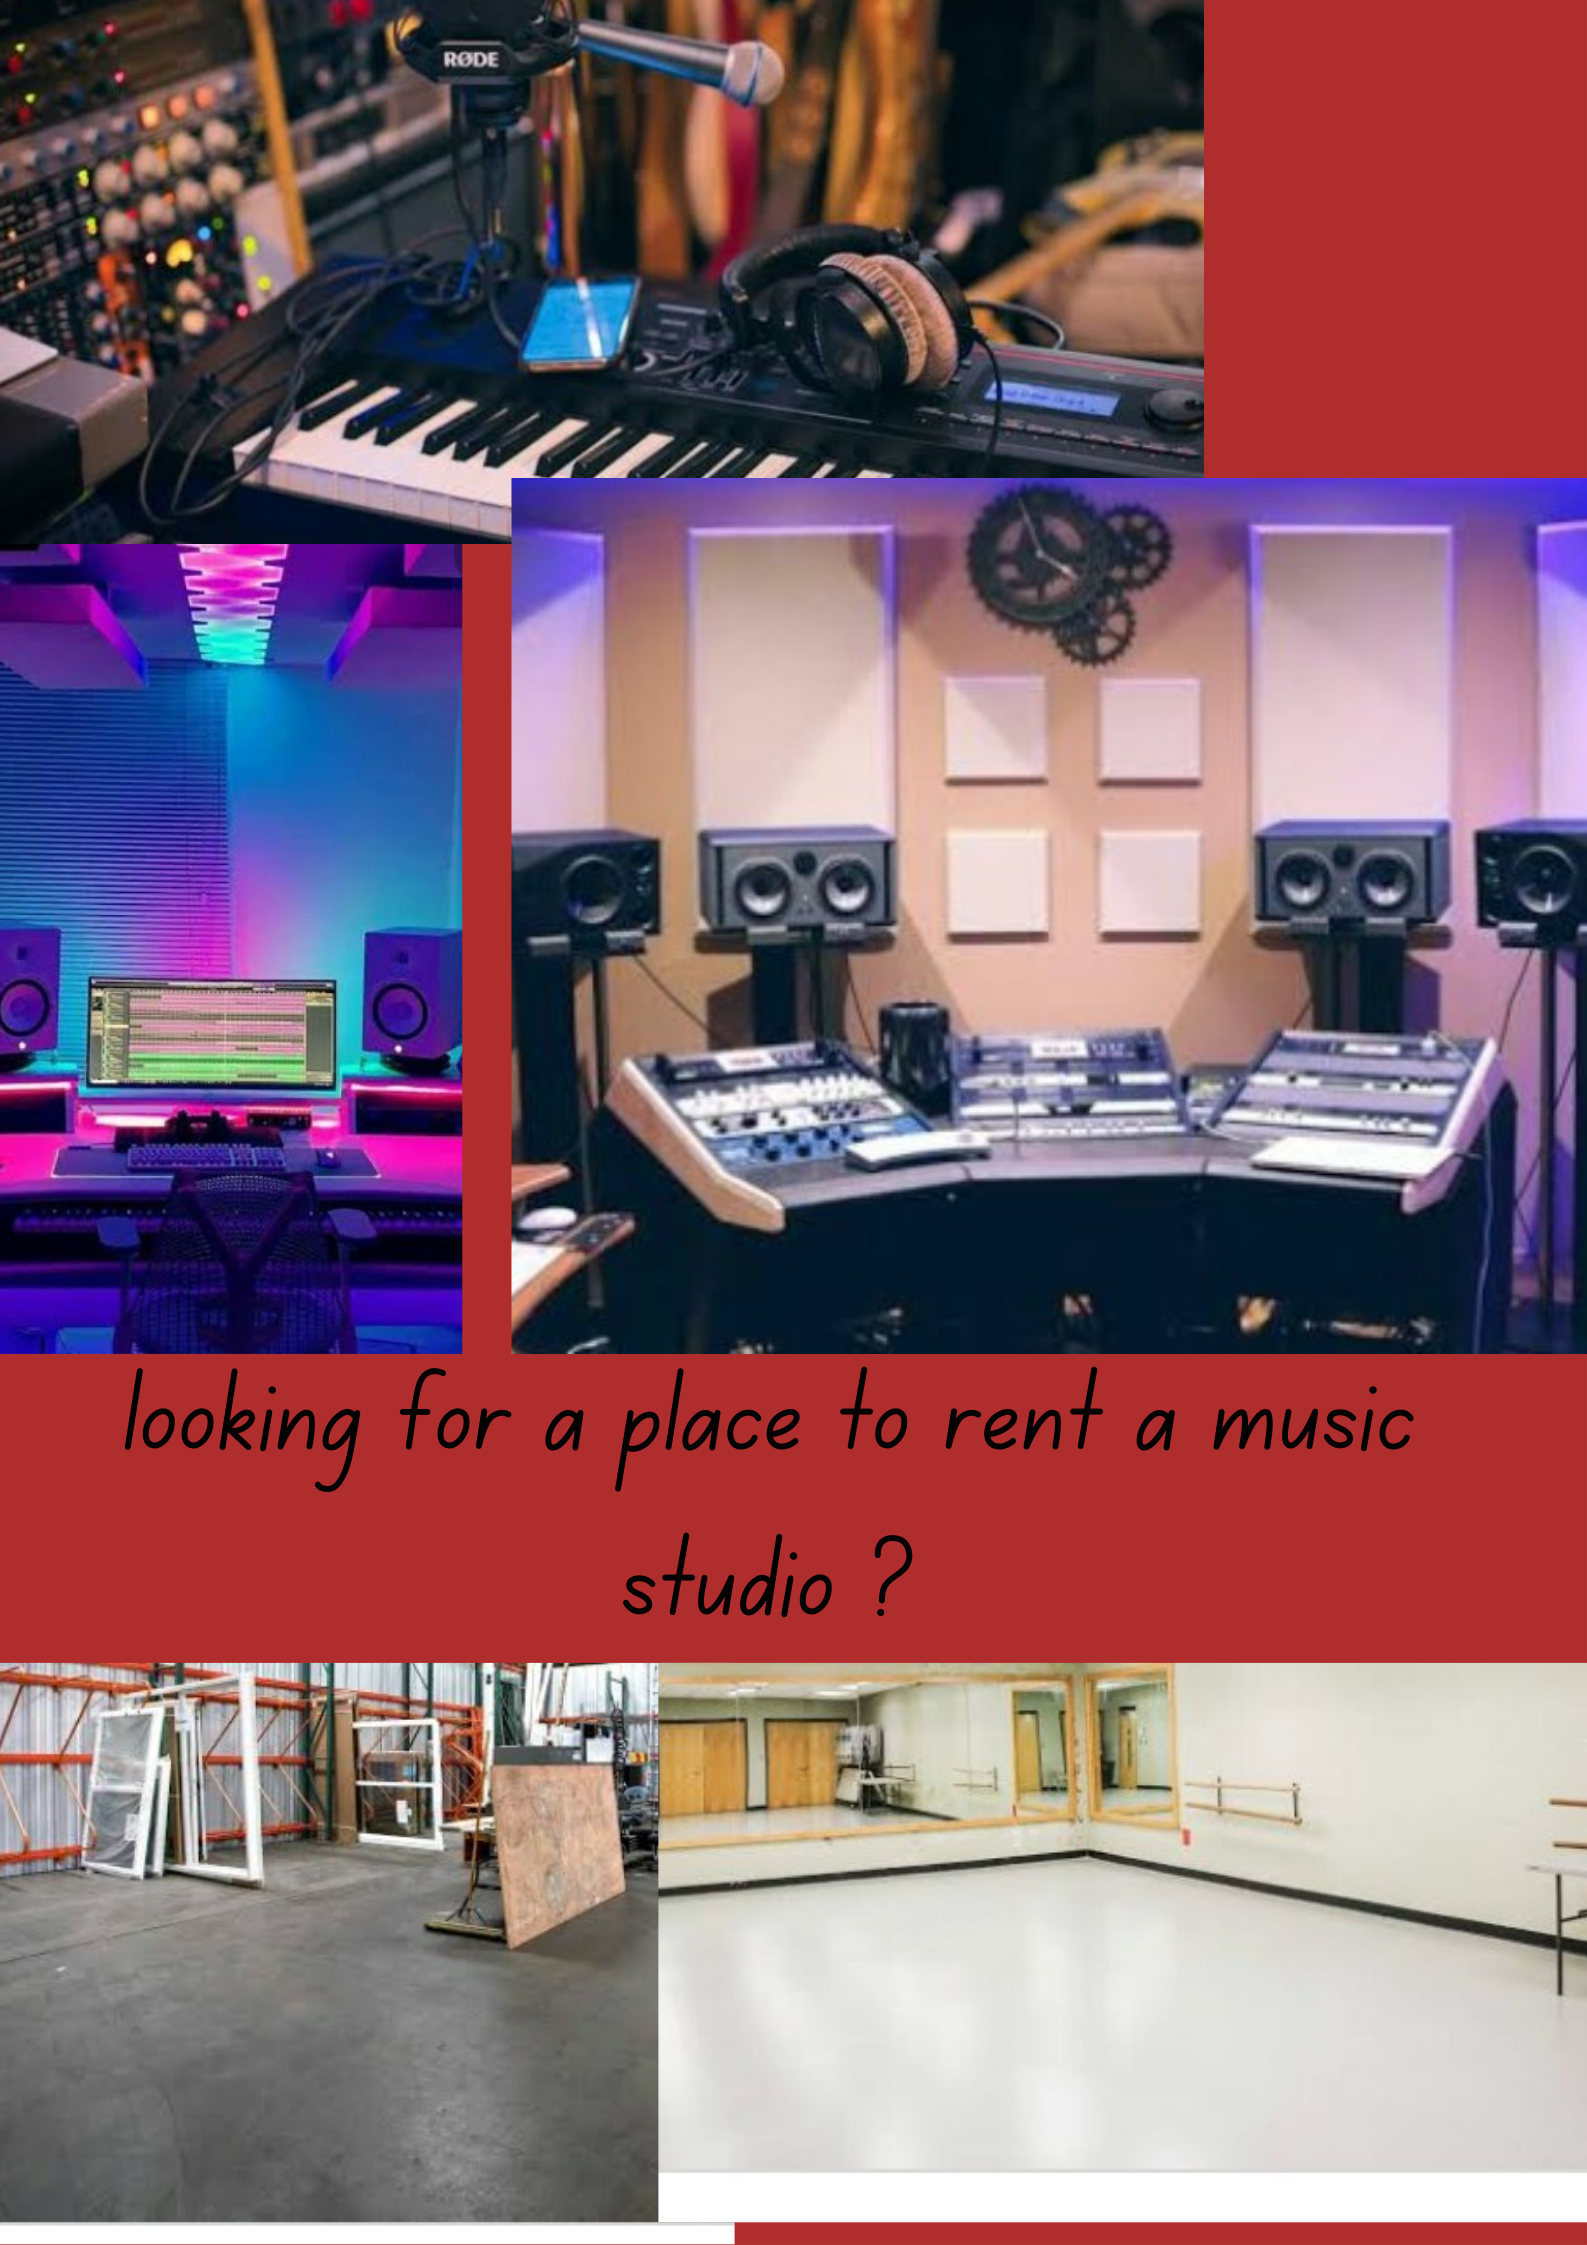 Looking for space to rent your music studio